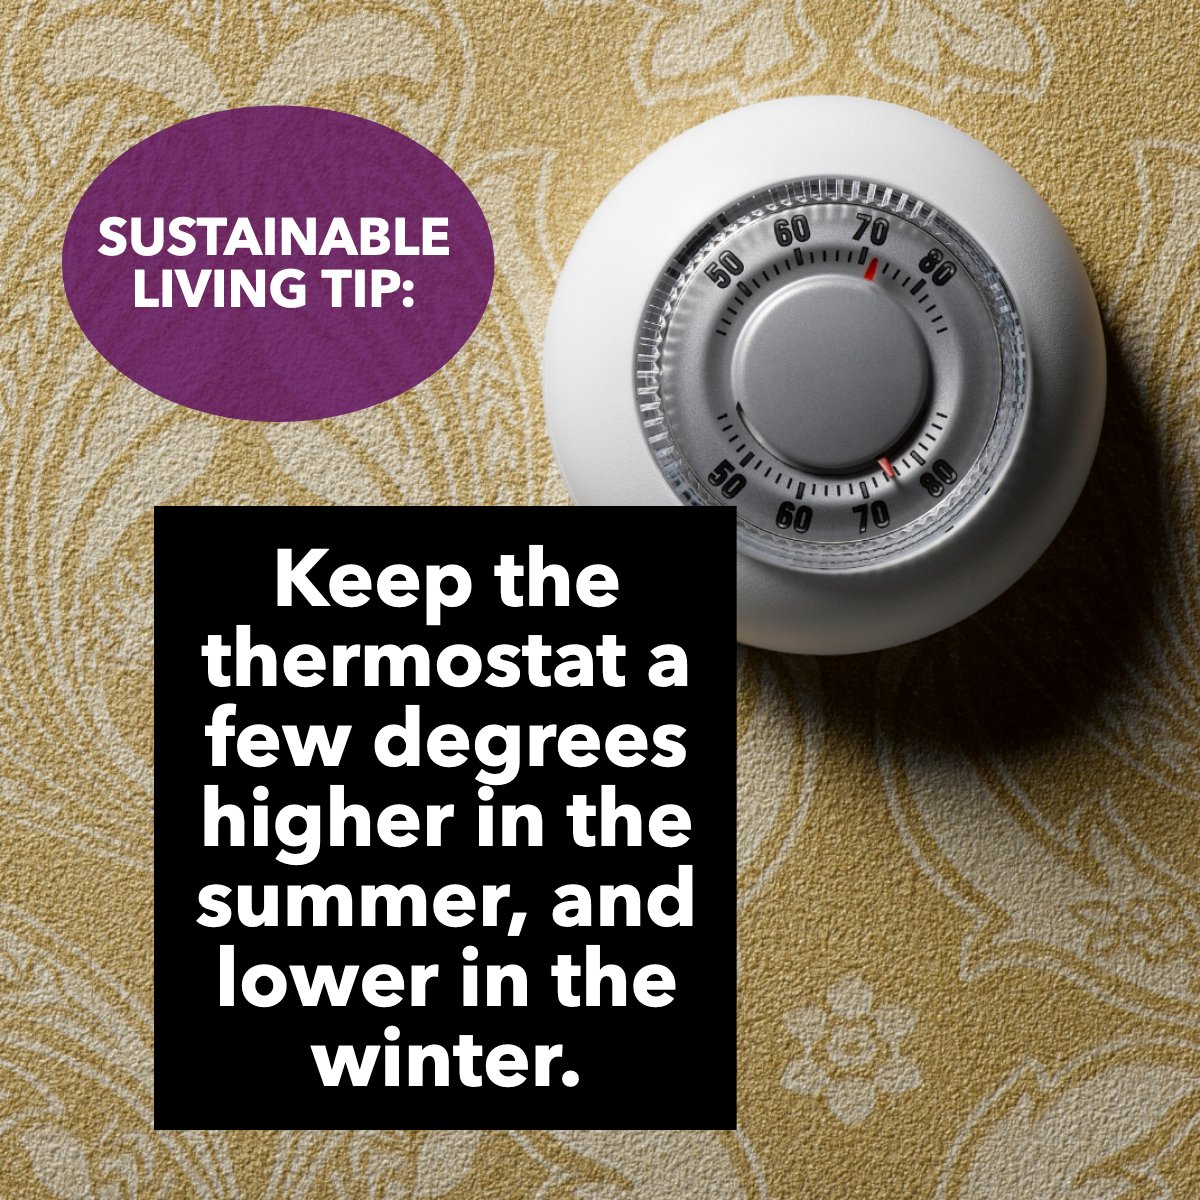 Here is a useful tip! 

Let's try it this and every season! ❄️

#sustainablelifestyle #sustainable #sustainablity #thermostat
 #riscosells #theriscogroup #kwmainline #Uptownliving